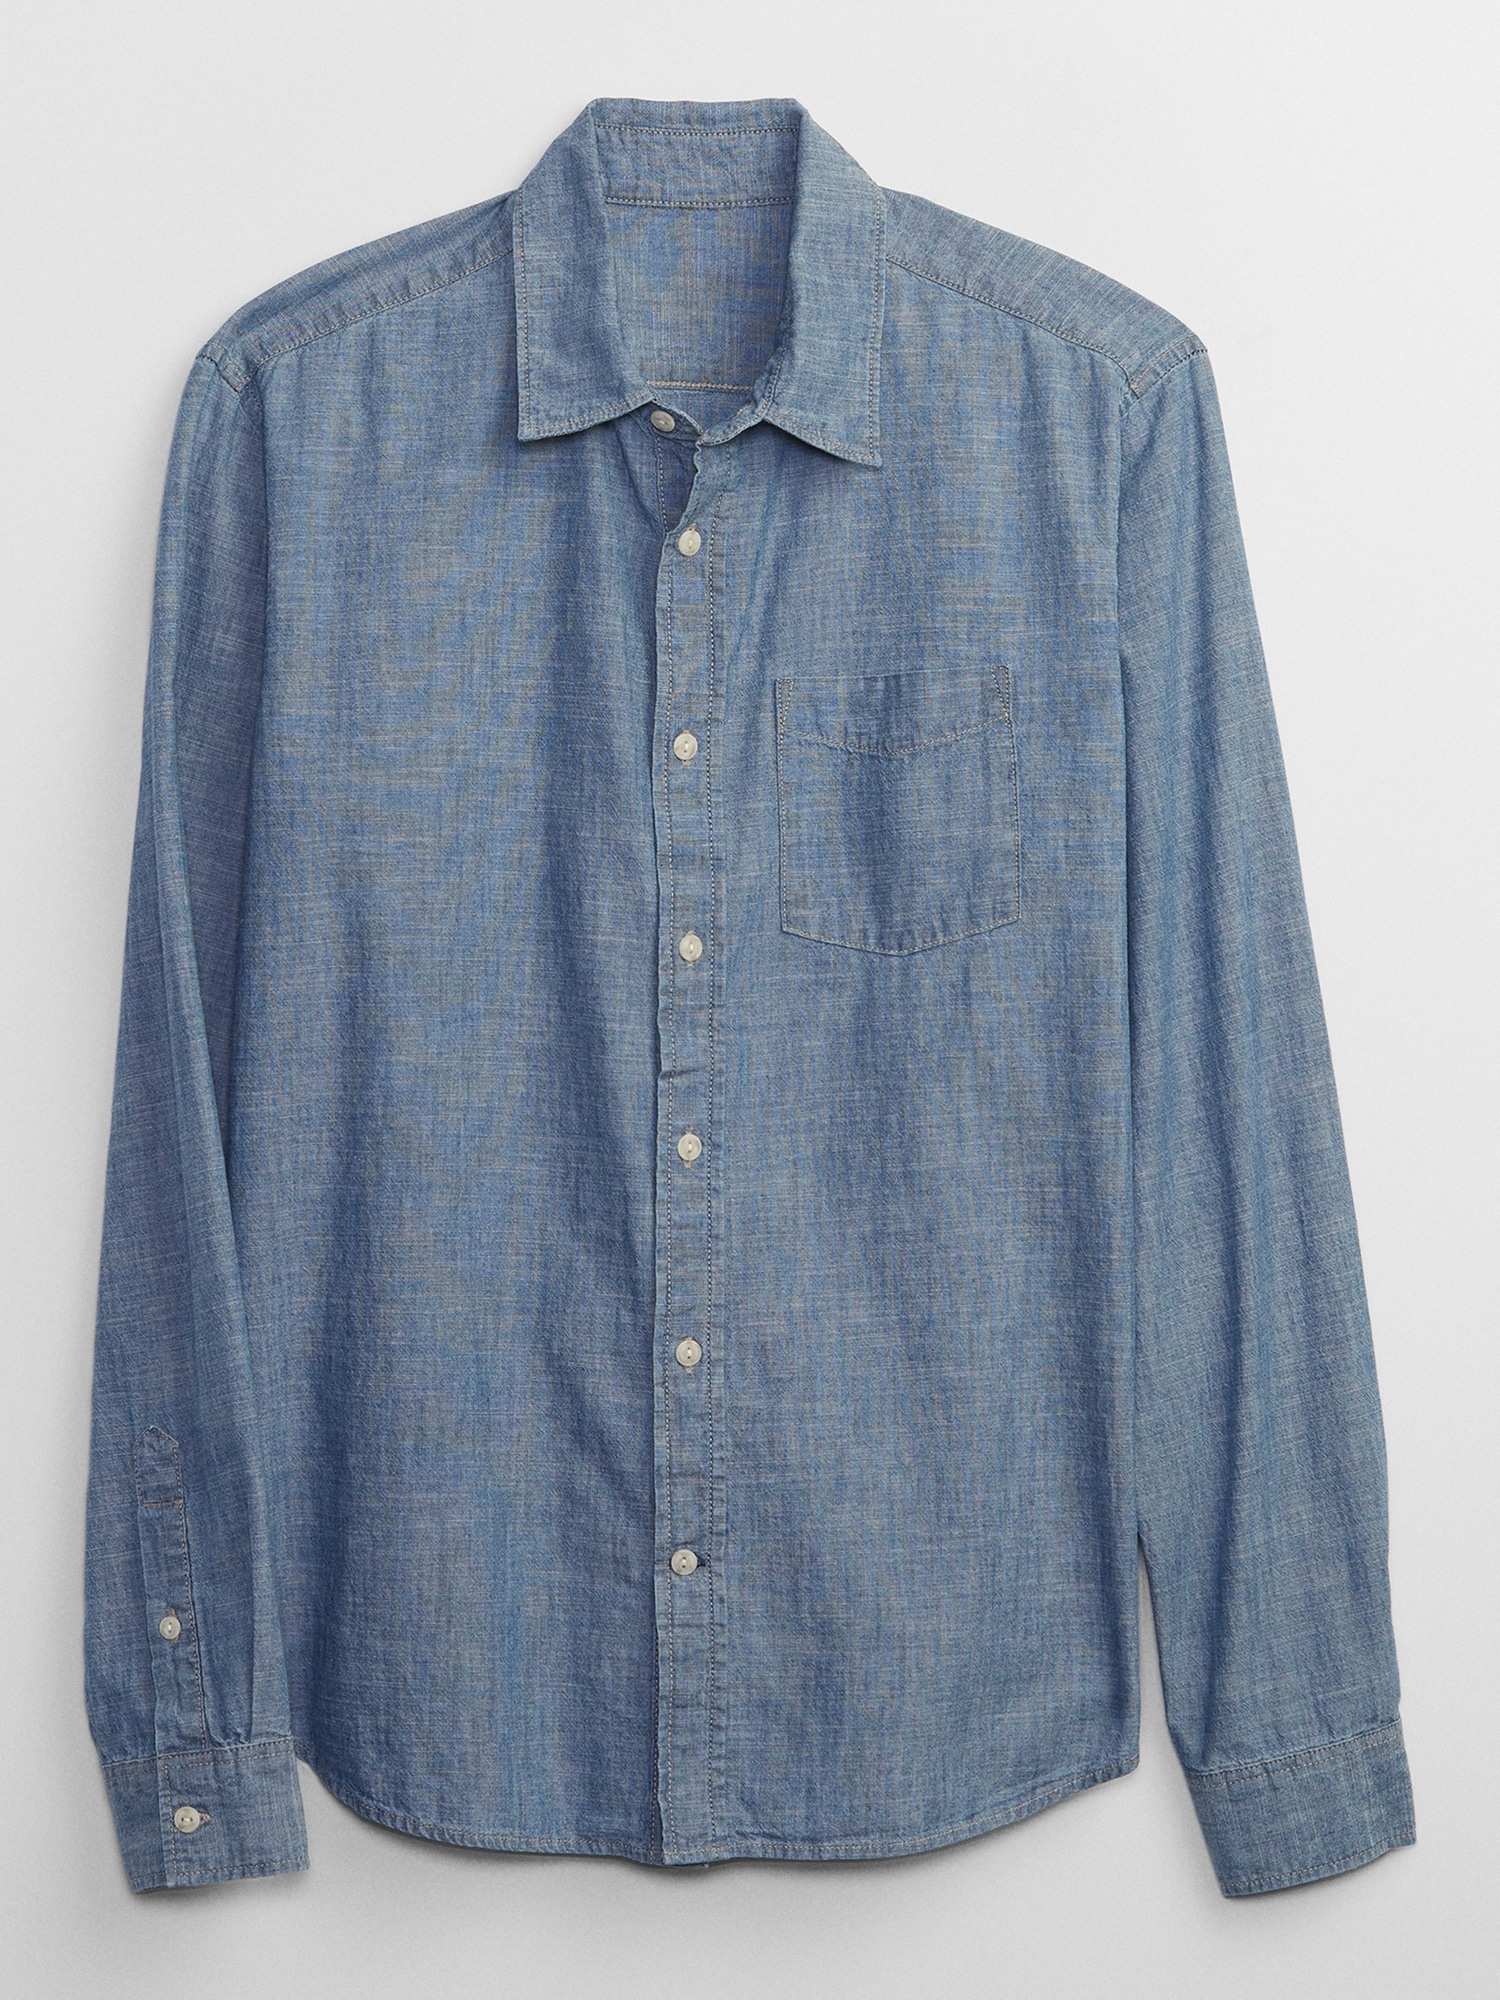 Chambray Shirt in Untucked Fit | Gap Factory